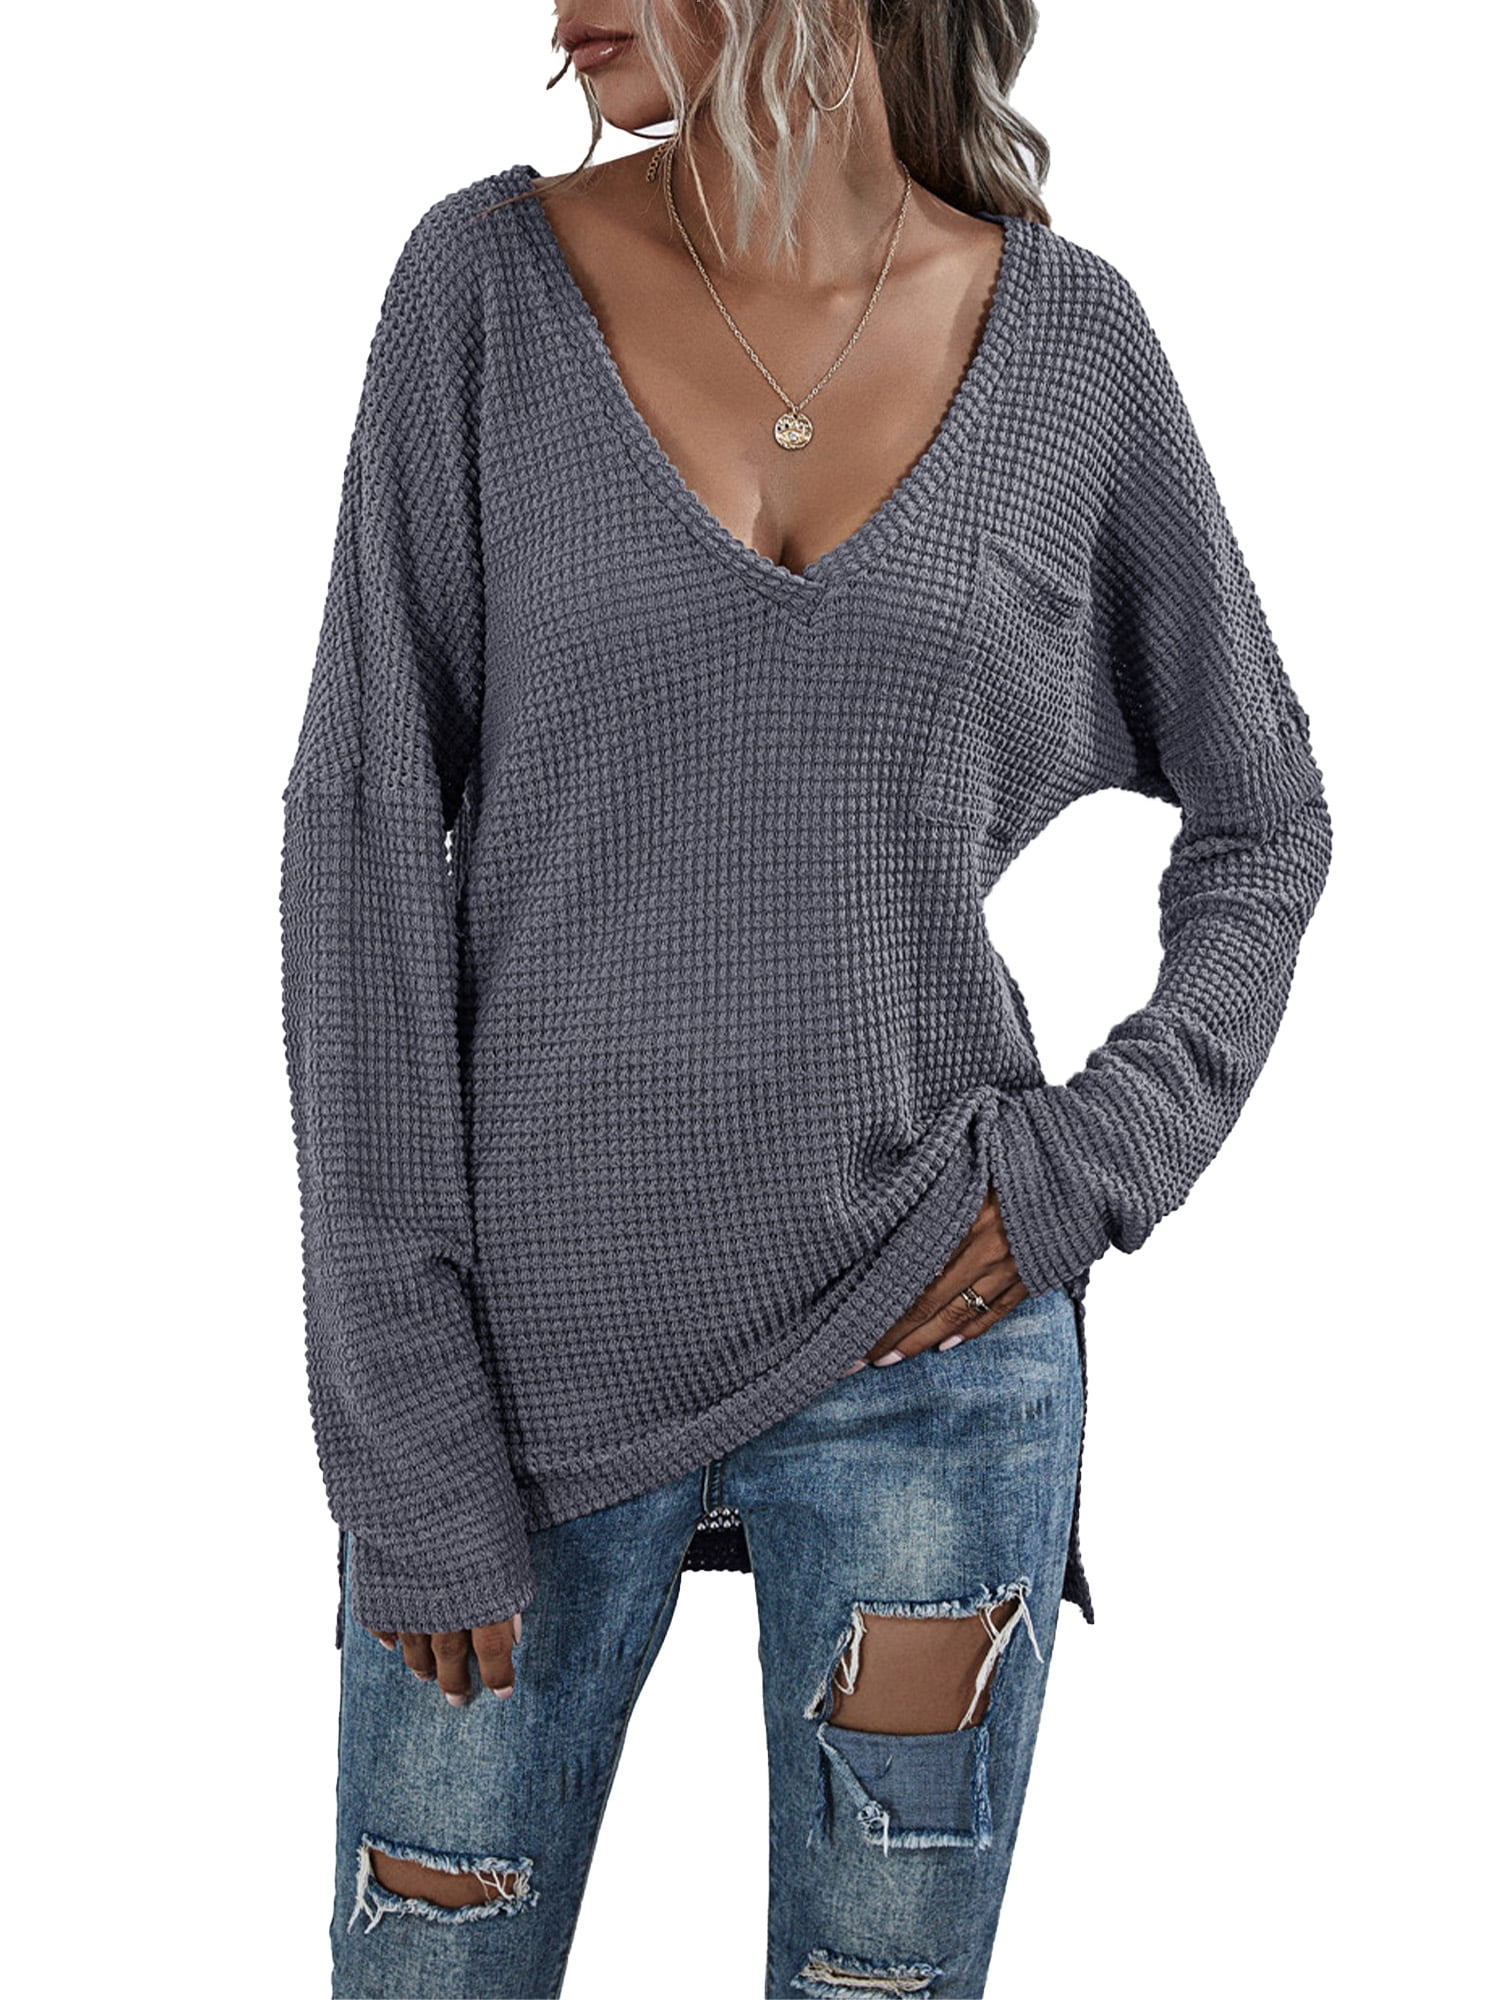 Casual Long Sleeve Star Pattern Side Split Loose Sweater Tops Womens Knit V Neck Pullover Sweaters